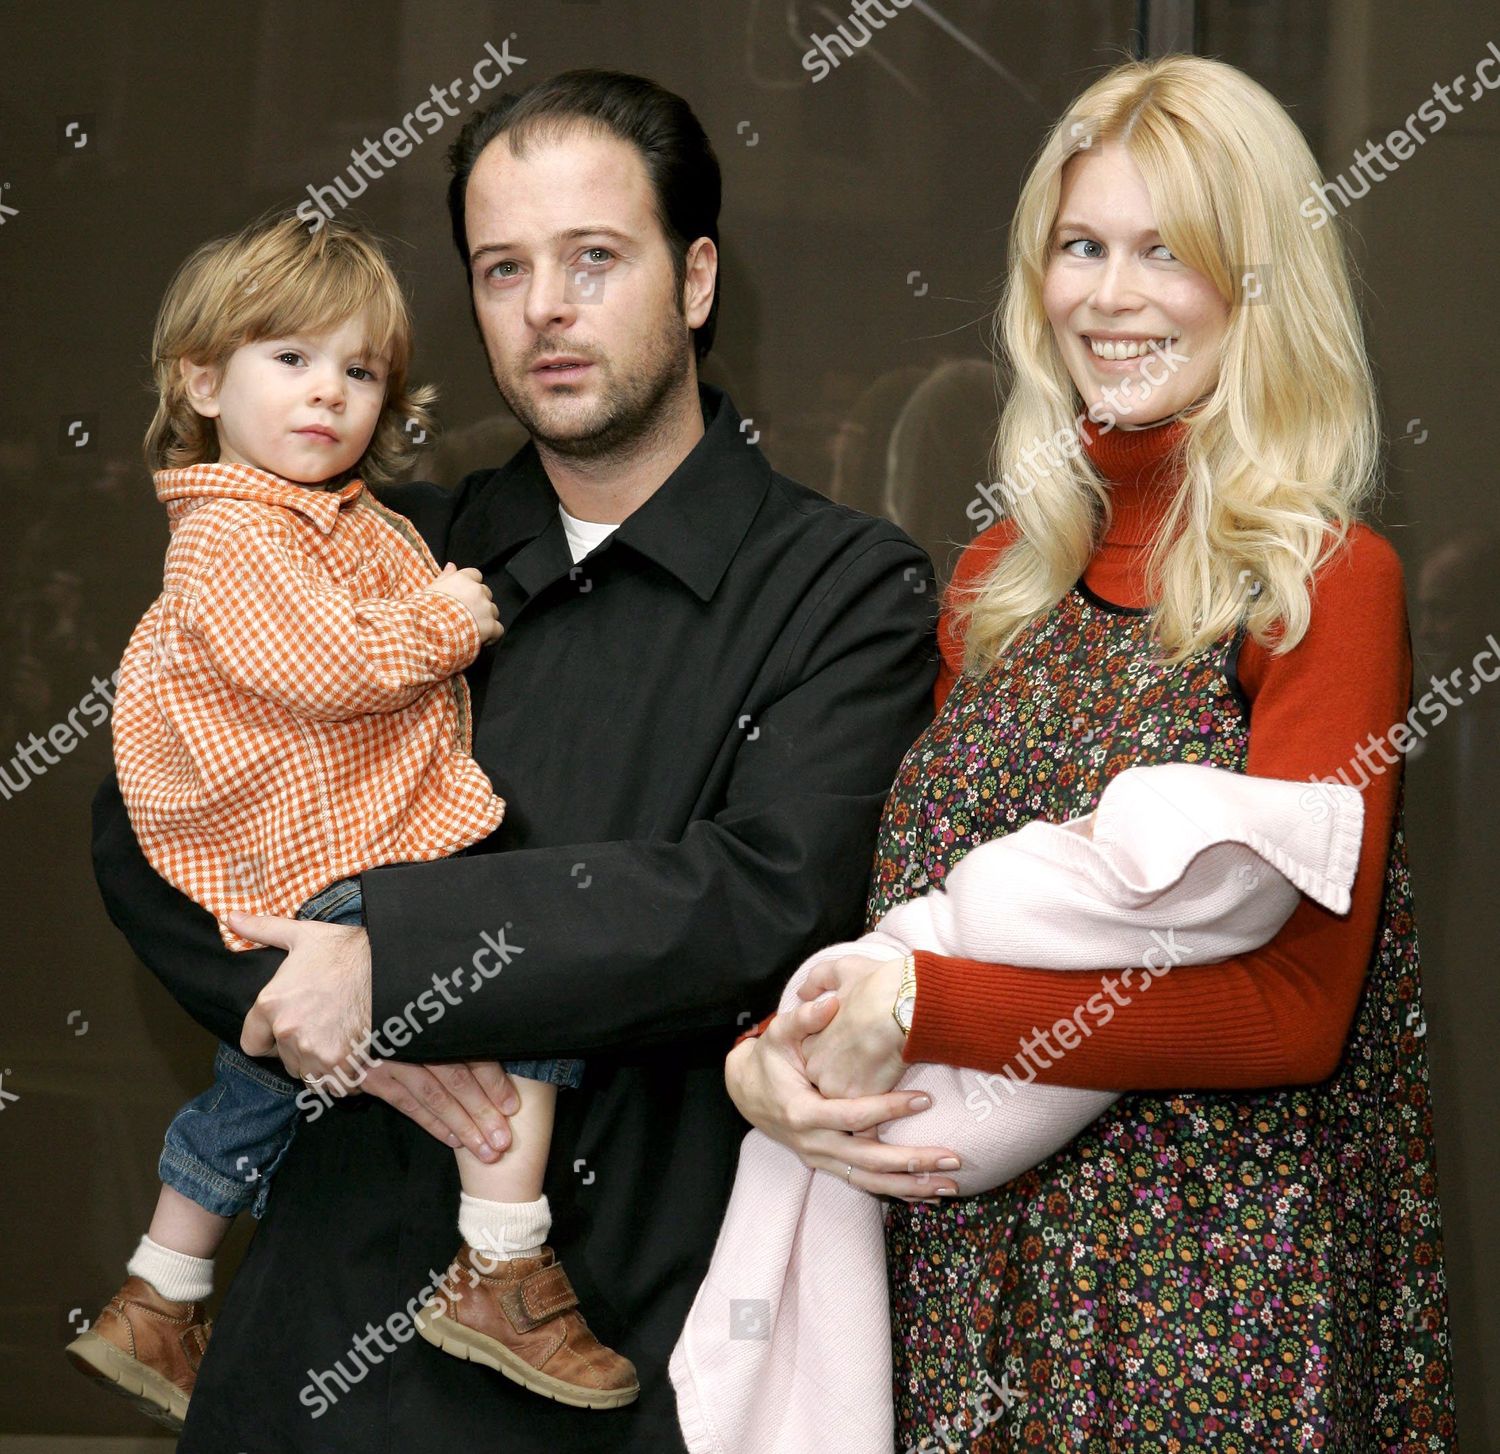 claudia-schiffer-leaves-the-portland-hospital-after-giving-birth-to-a-baby-daughter-london-britain-shutterstock-editorial-504014e.jpg